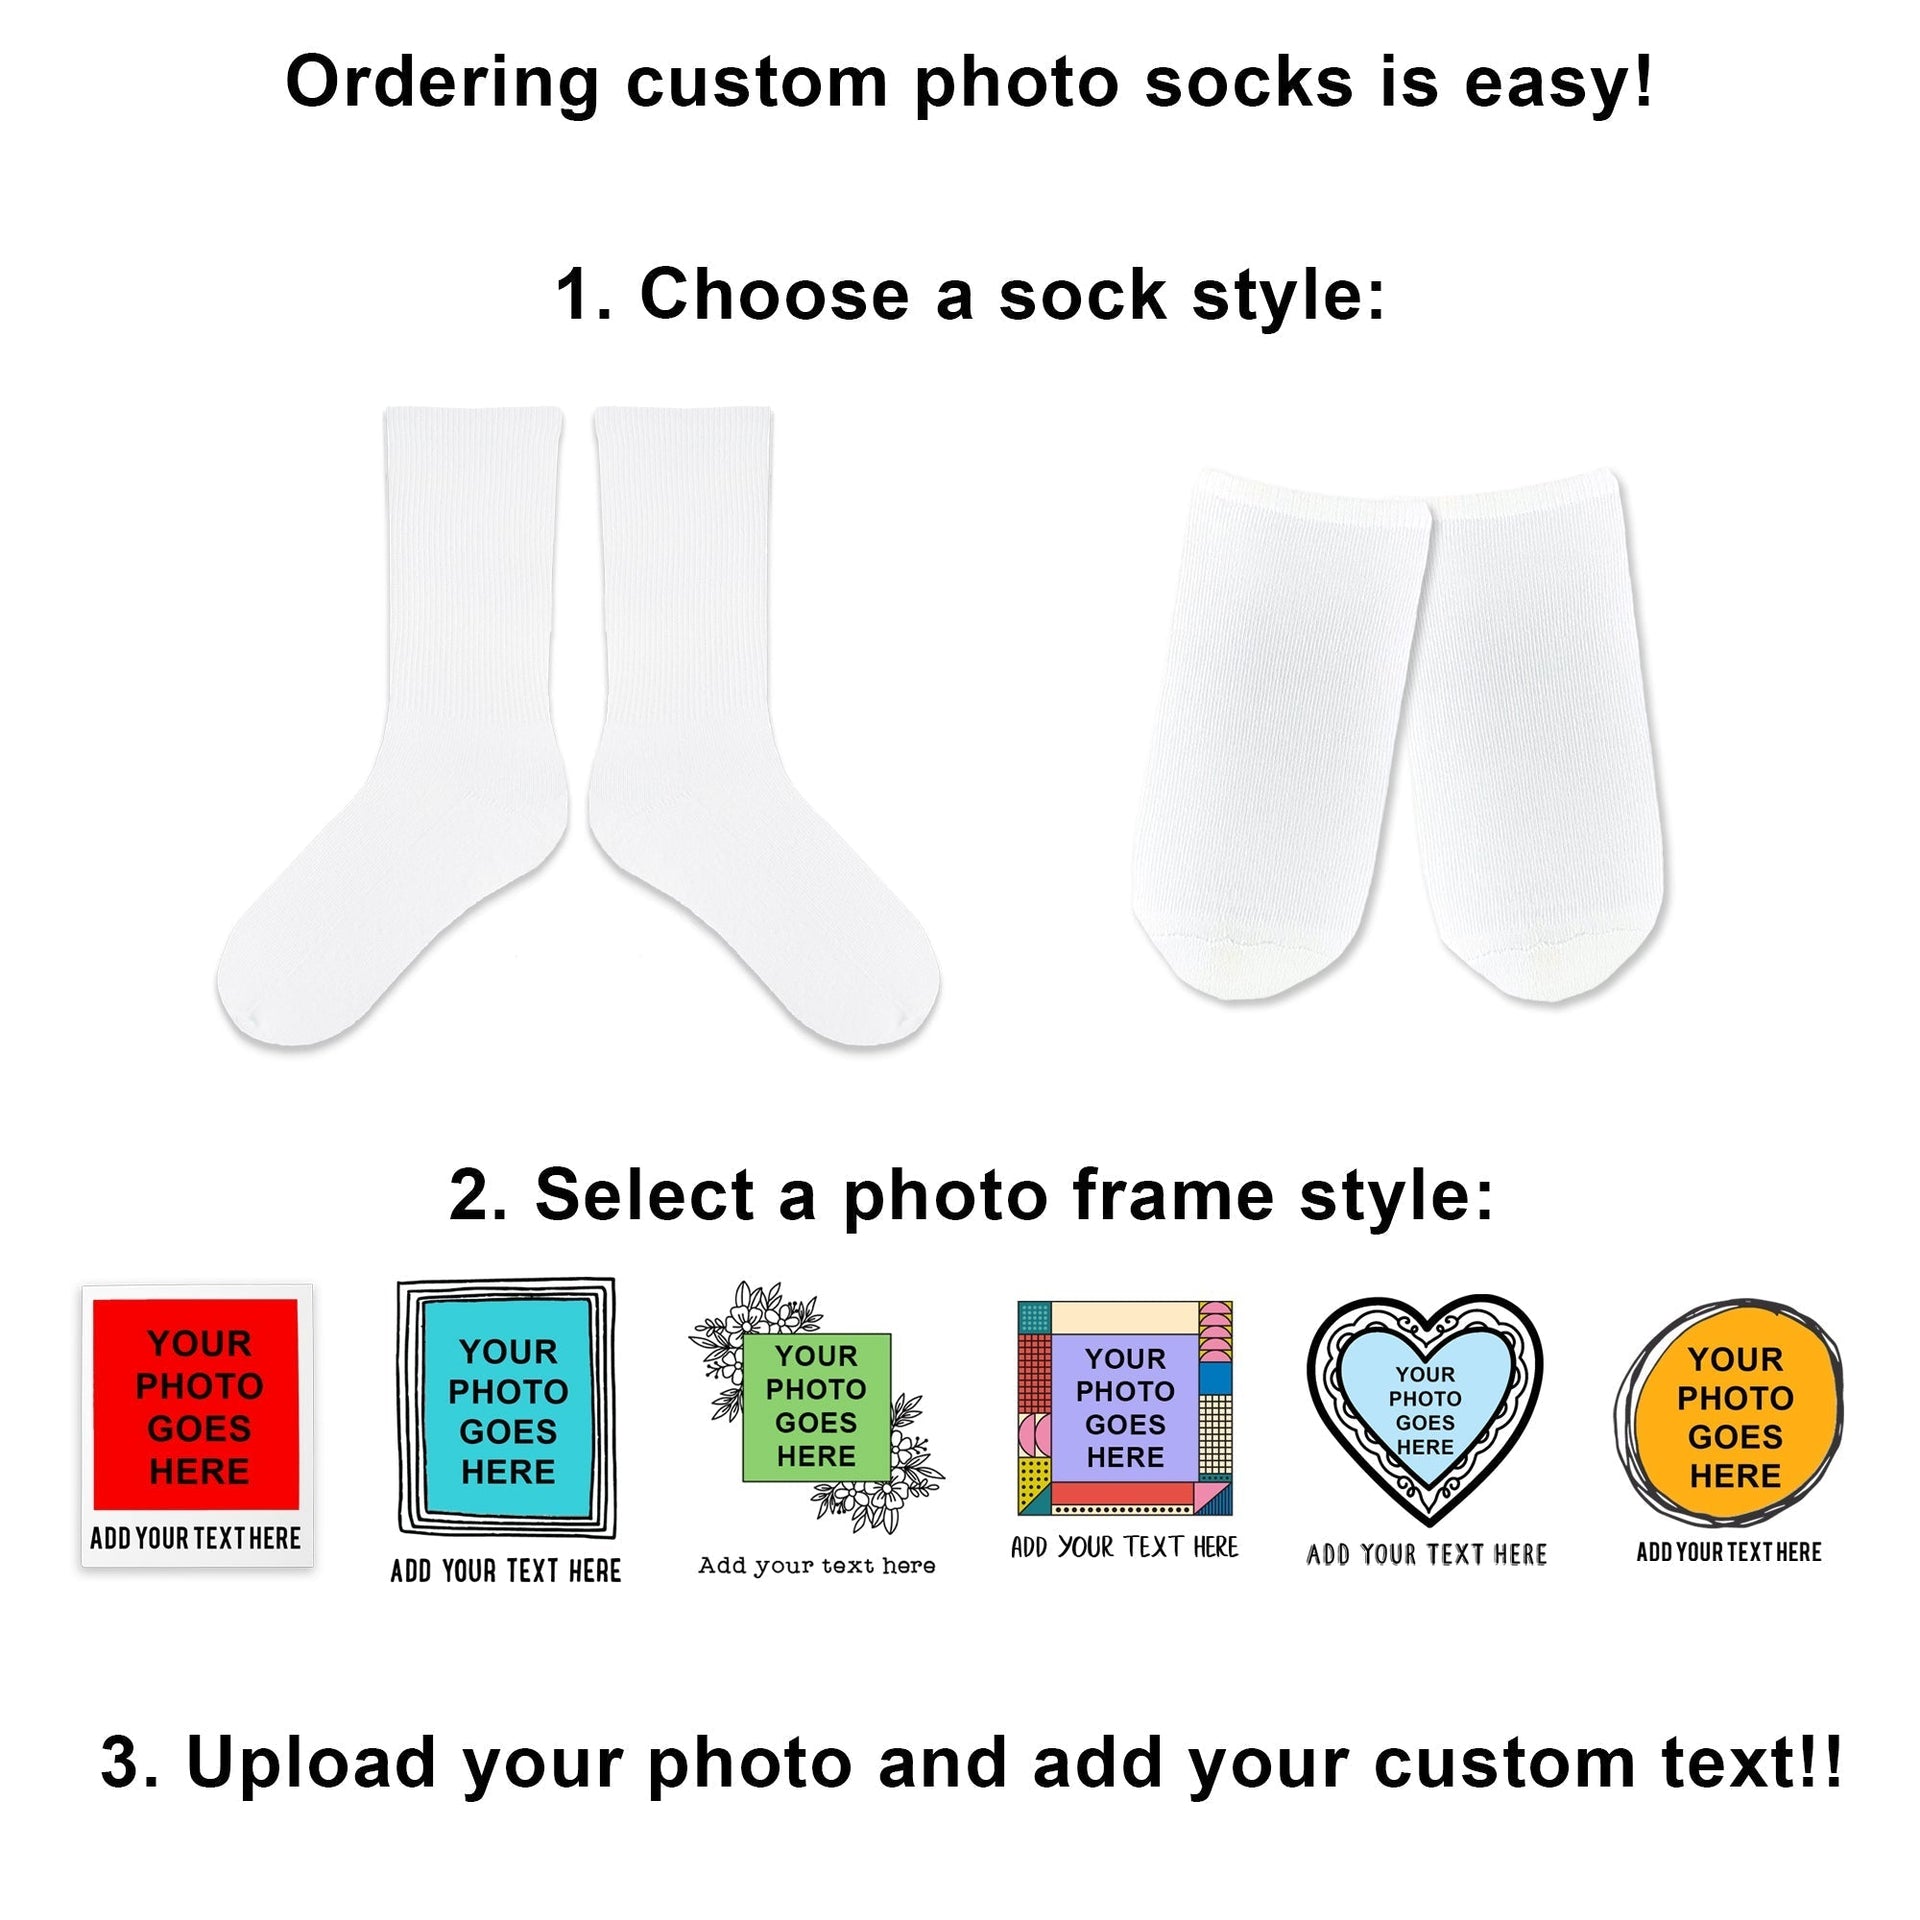 Guide to ordering custom printed photo frame design personalized with your own photo and text on white cotton crew socks.